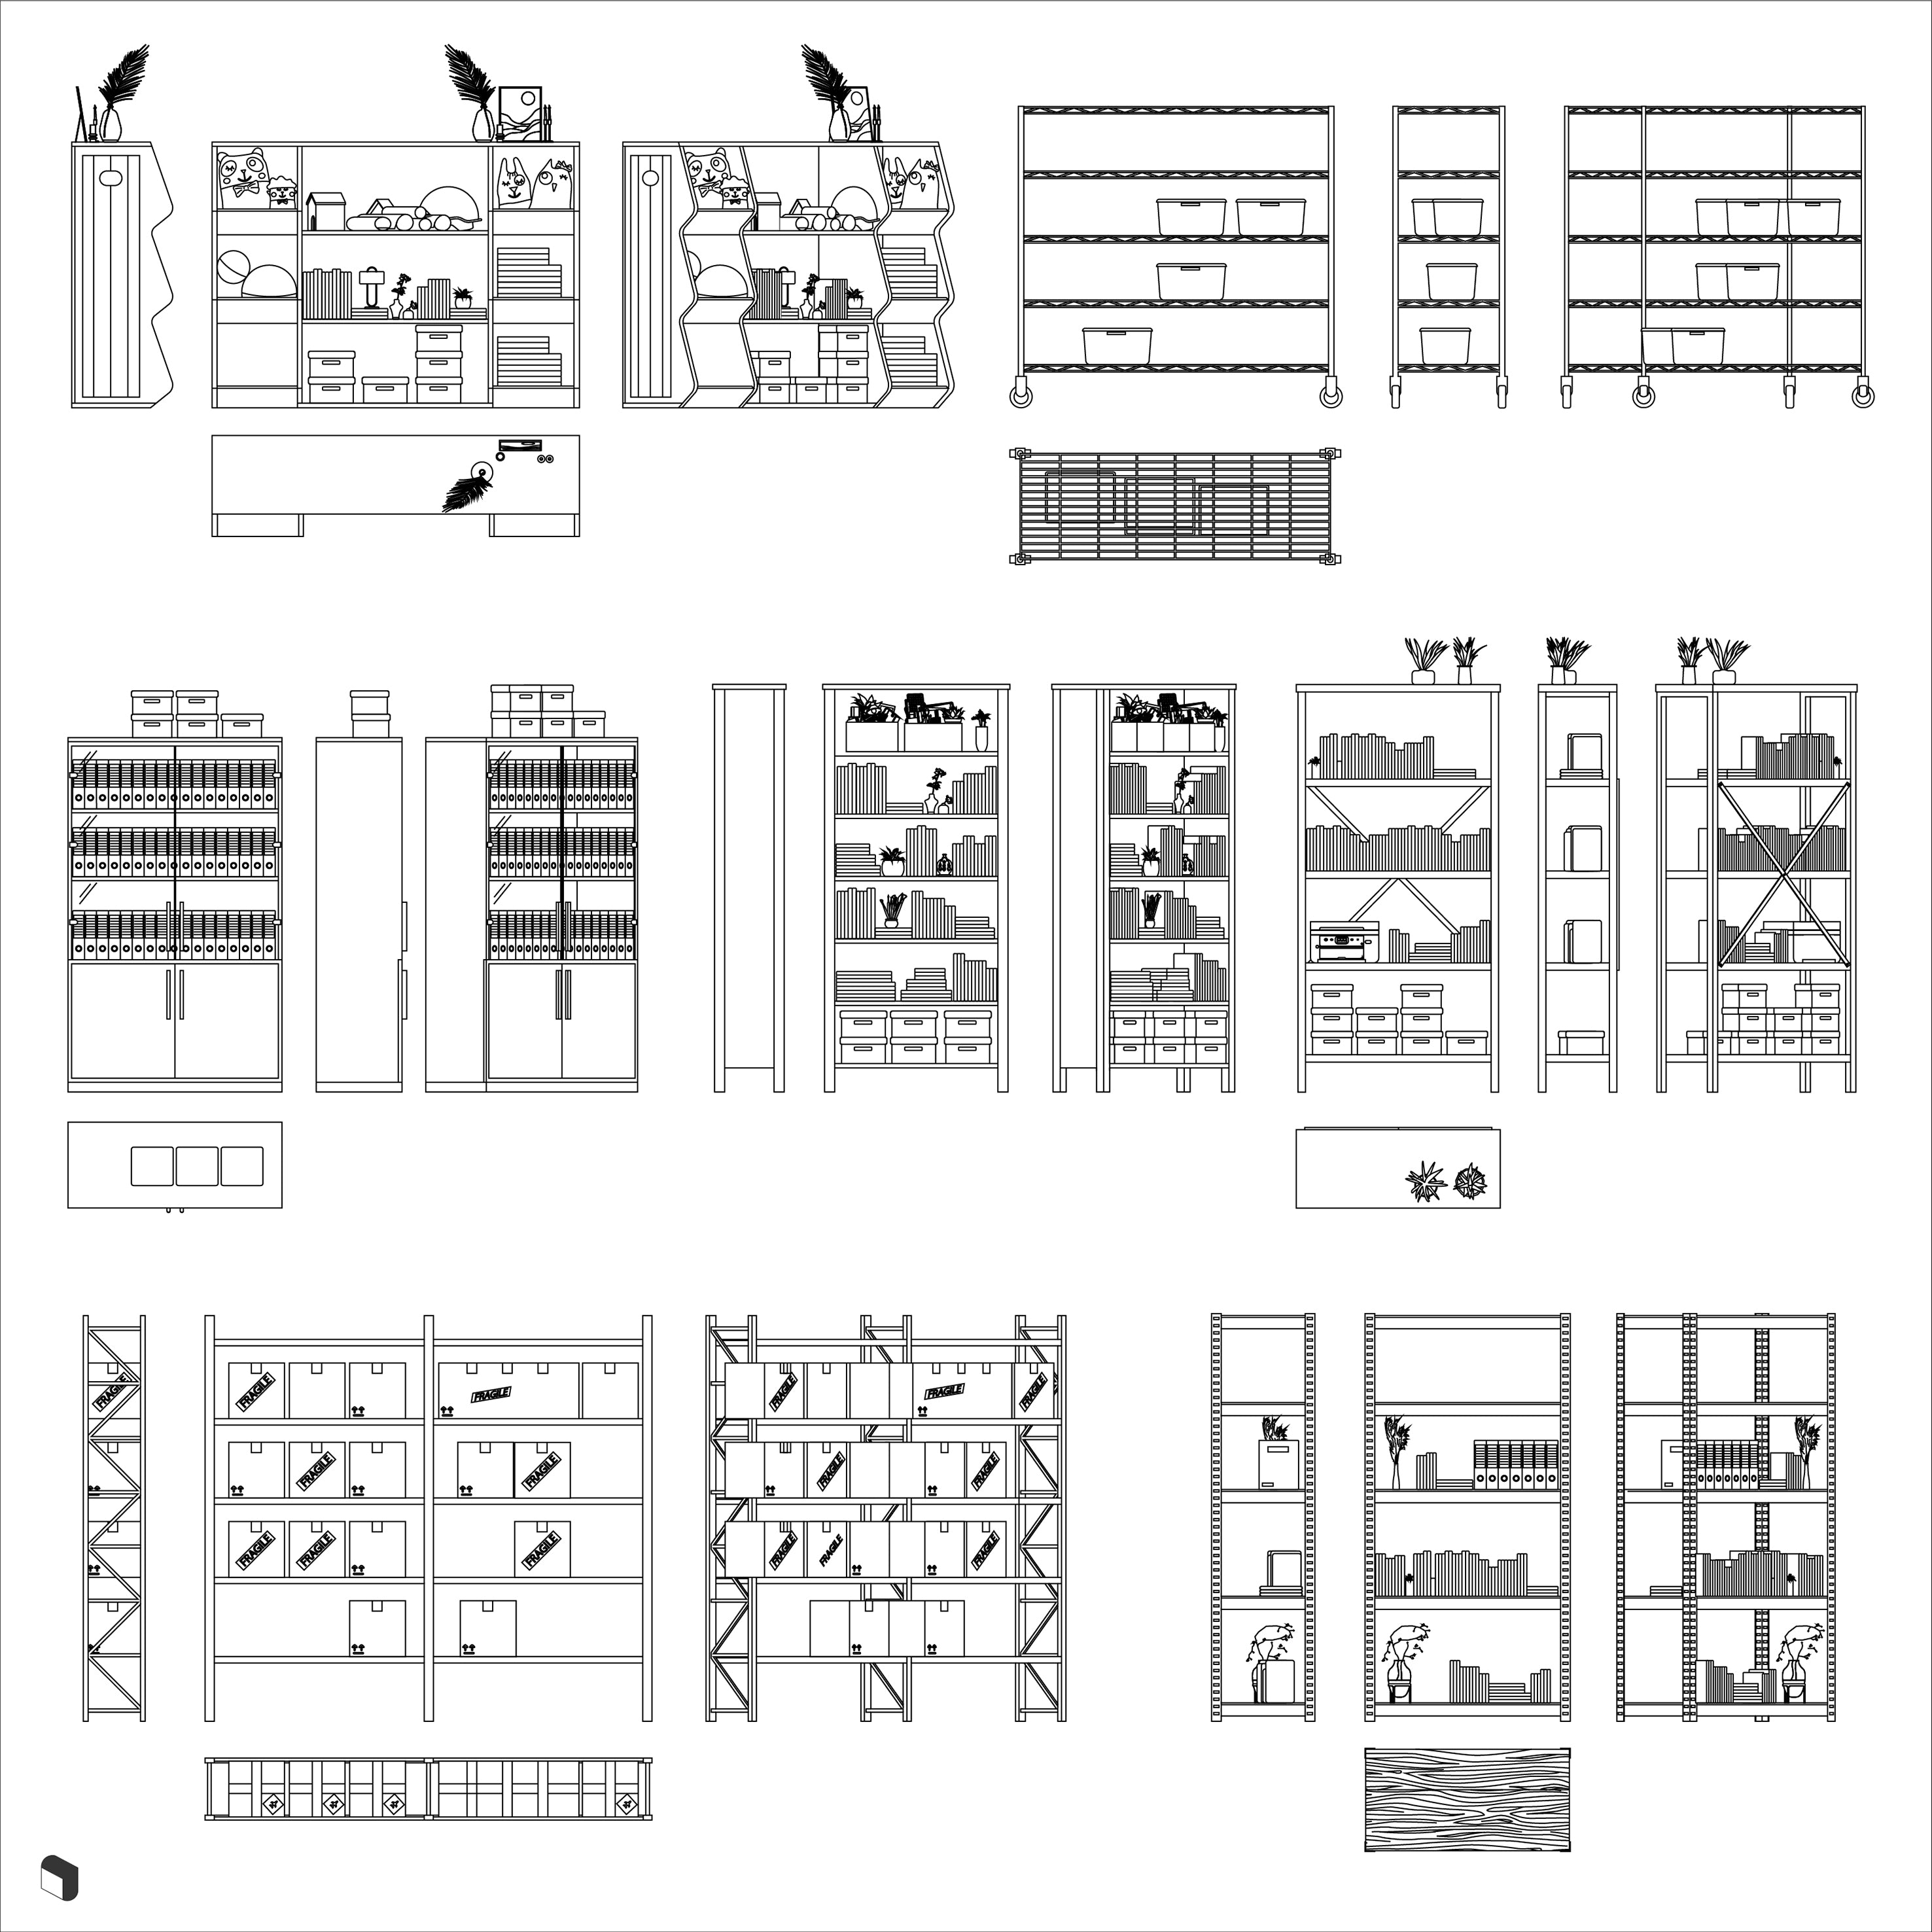 Cad Complete Bookcases Elevation & Top View DWG | Toffu Co